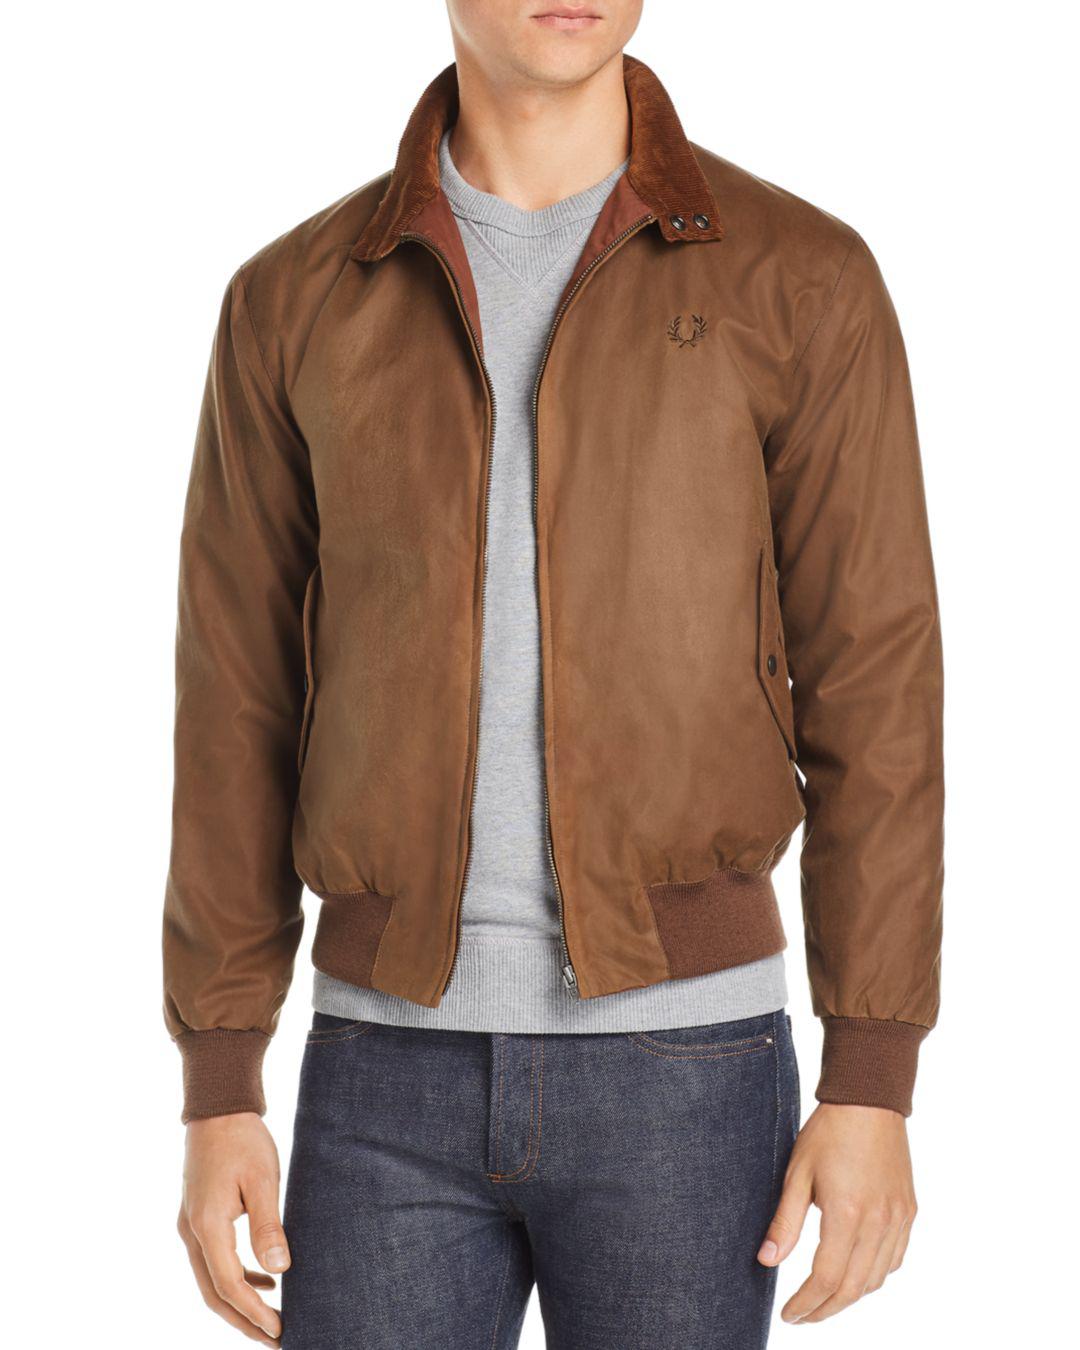 Fred Perry Harrington Waxed Bomber Jacket in Tobacco (Brown) for Men - Lyst